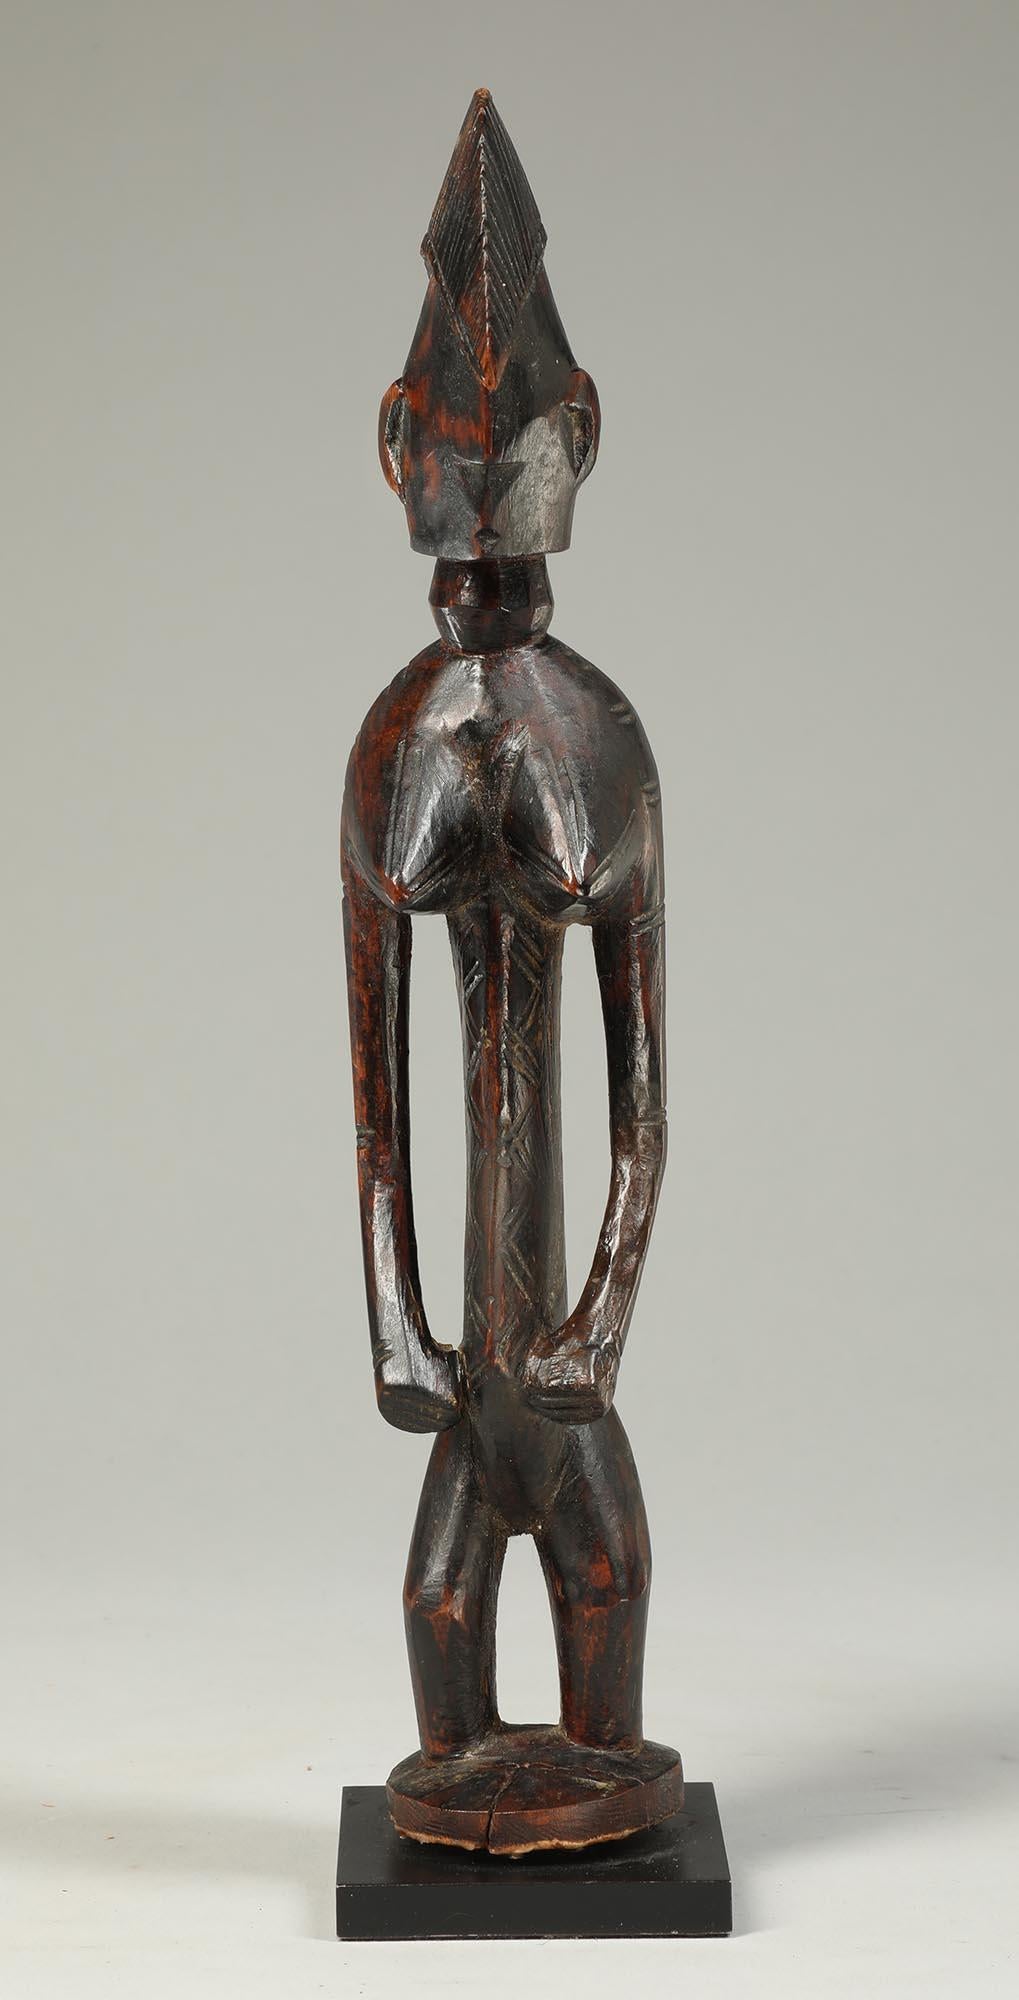 Early Bambara or Malinke standing female figure with arms at sides, heavy wear and polish from handling and use.  Possibly cut from the top of prestige staff.  Fine refined abstract face.
From an old European collection.
10 1/2 inches high, on